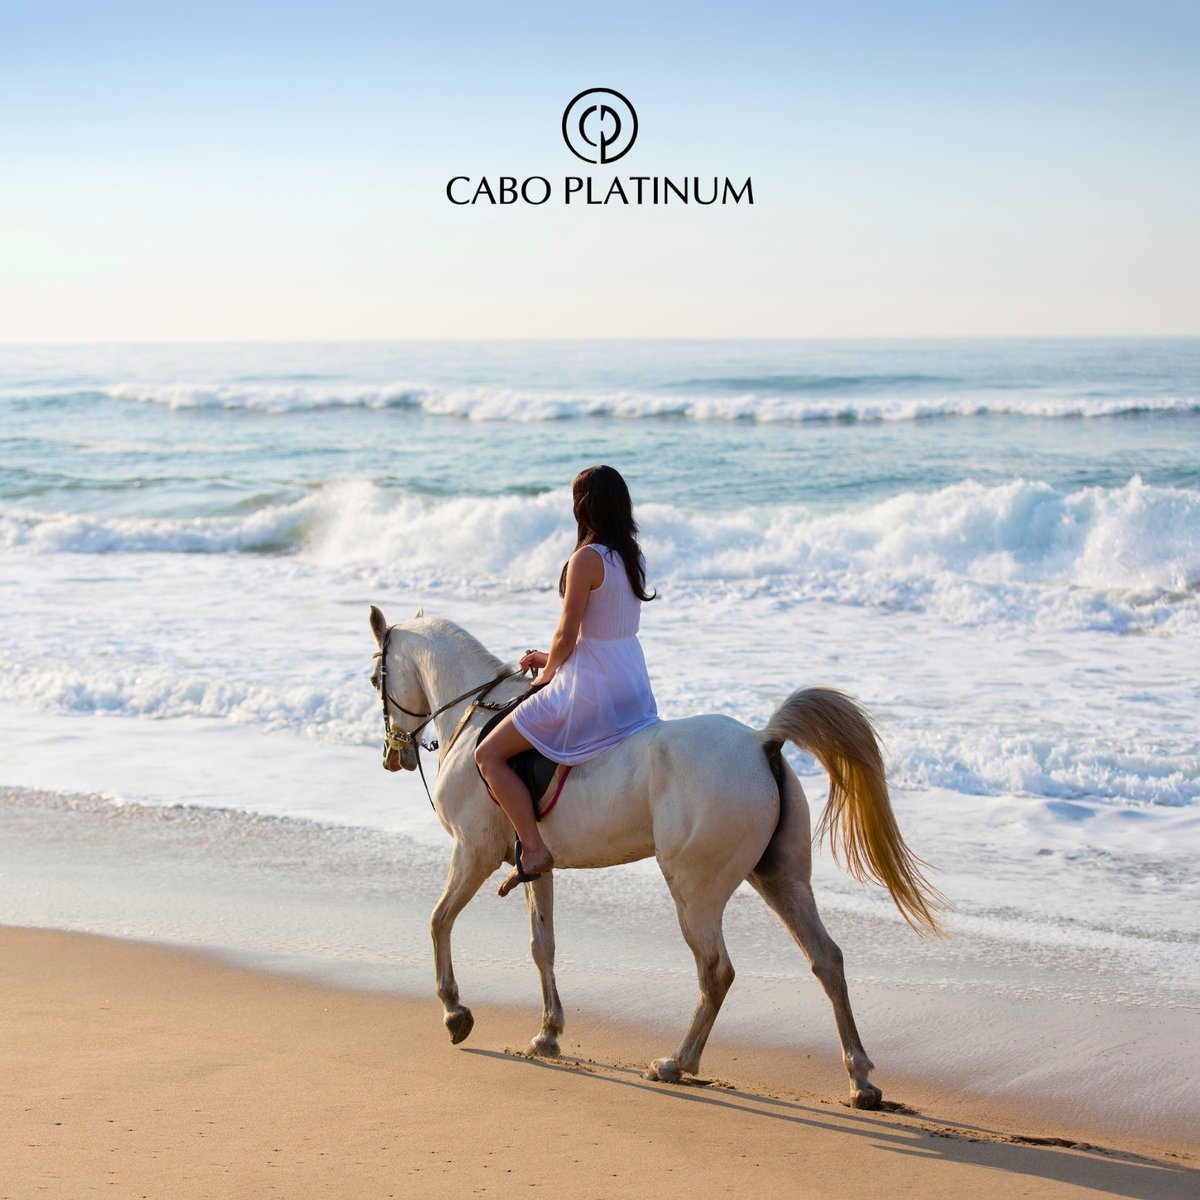 Let Cabo Platinum take you on a journey through stunning landscapes, pristine beaches, and rugged terrain, all on horseback.

Book your dream vacation: caboplatinum.com

#caboplatinum #luxuryrentals #luxuryvacations #concierge #loscabos #horsebackriding #adventure